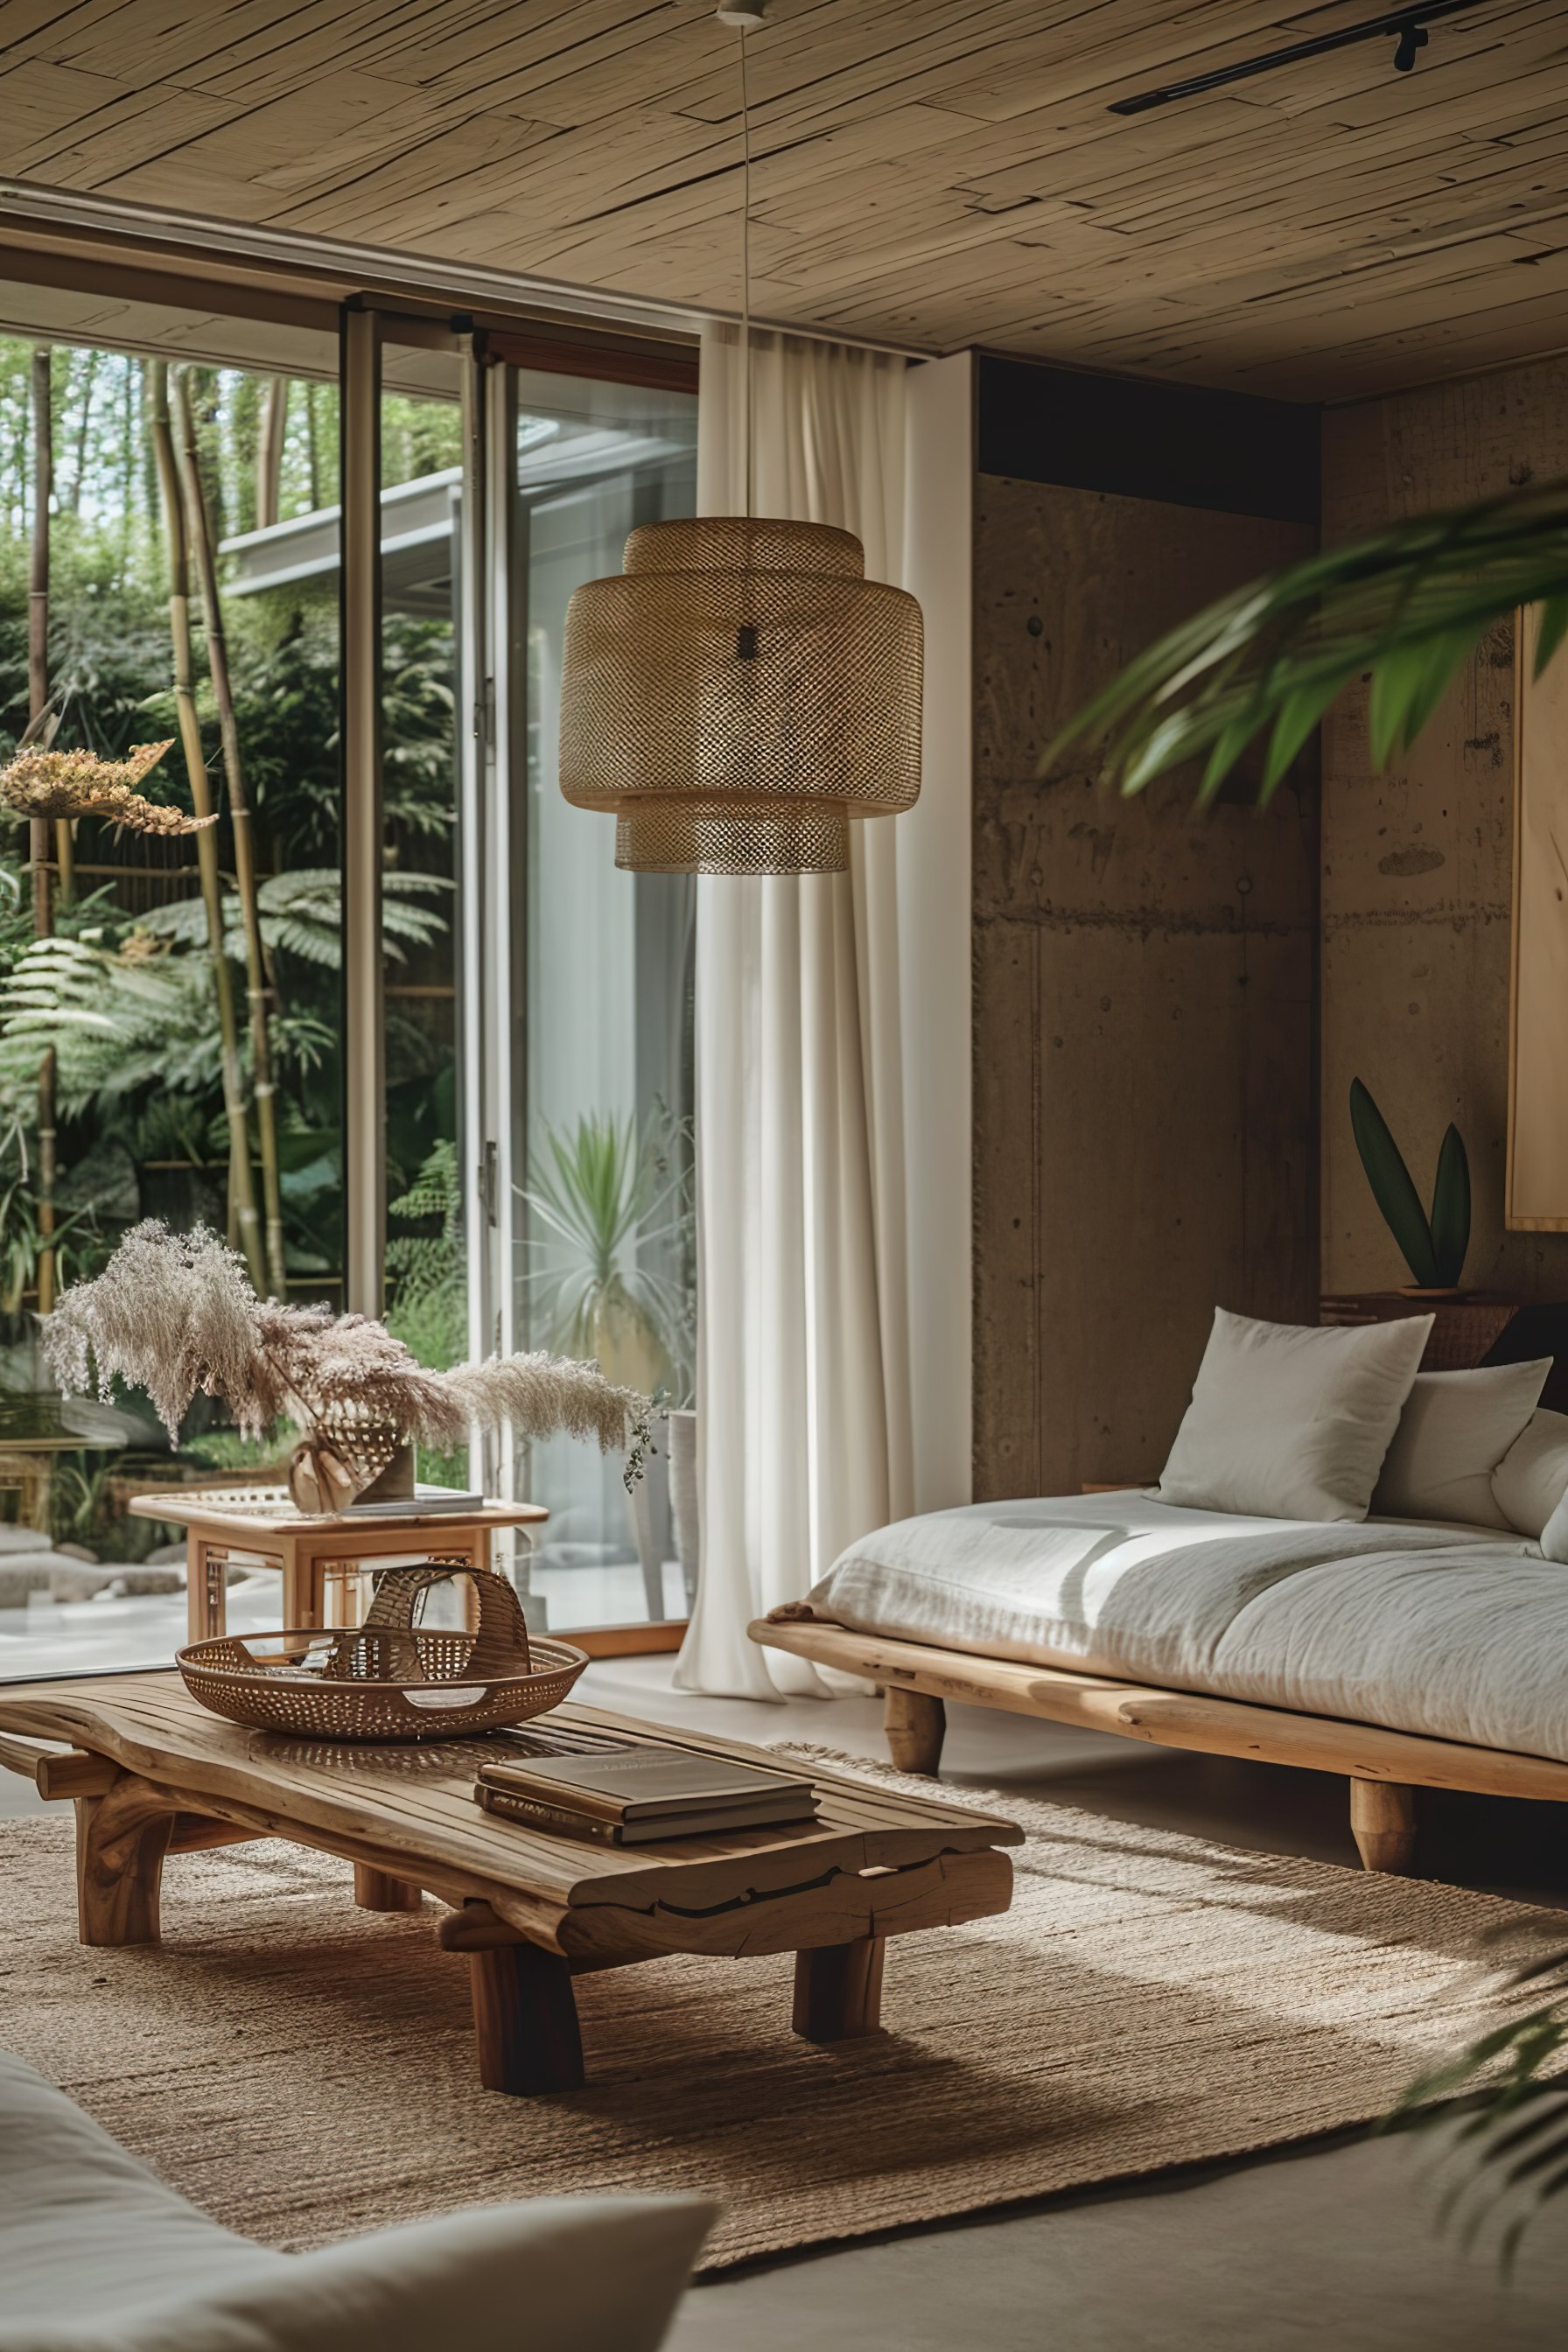 Modern interior with a wooden bed and coffee table, rattan lamp hanging above, next to a glass door overlooking greenery.